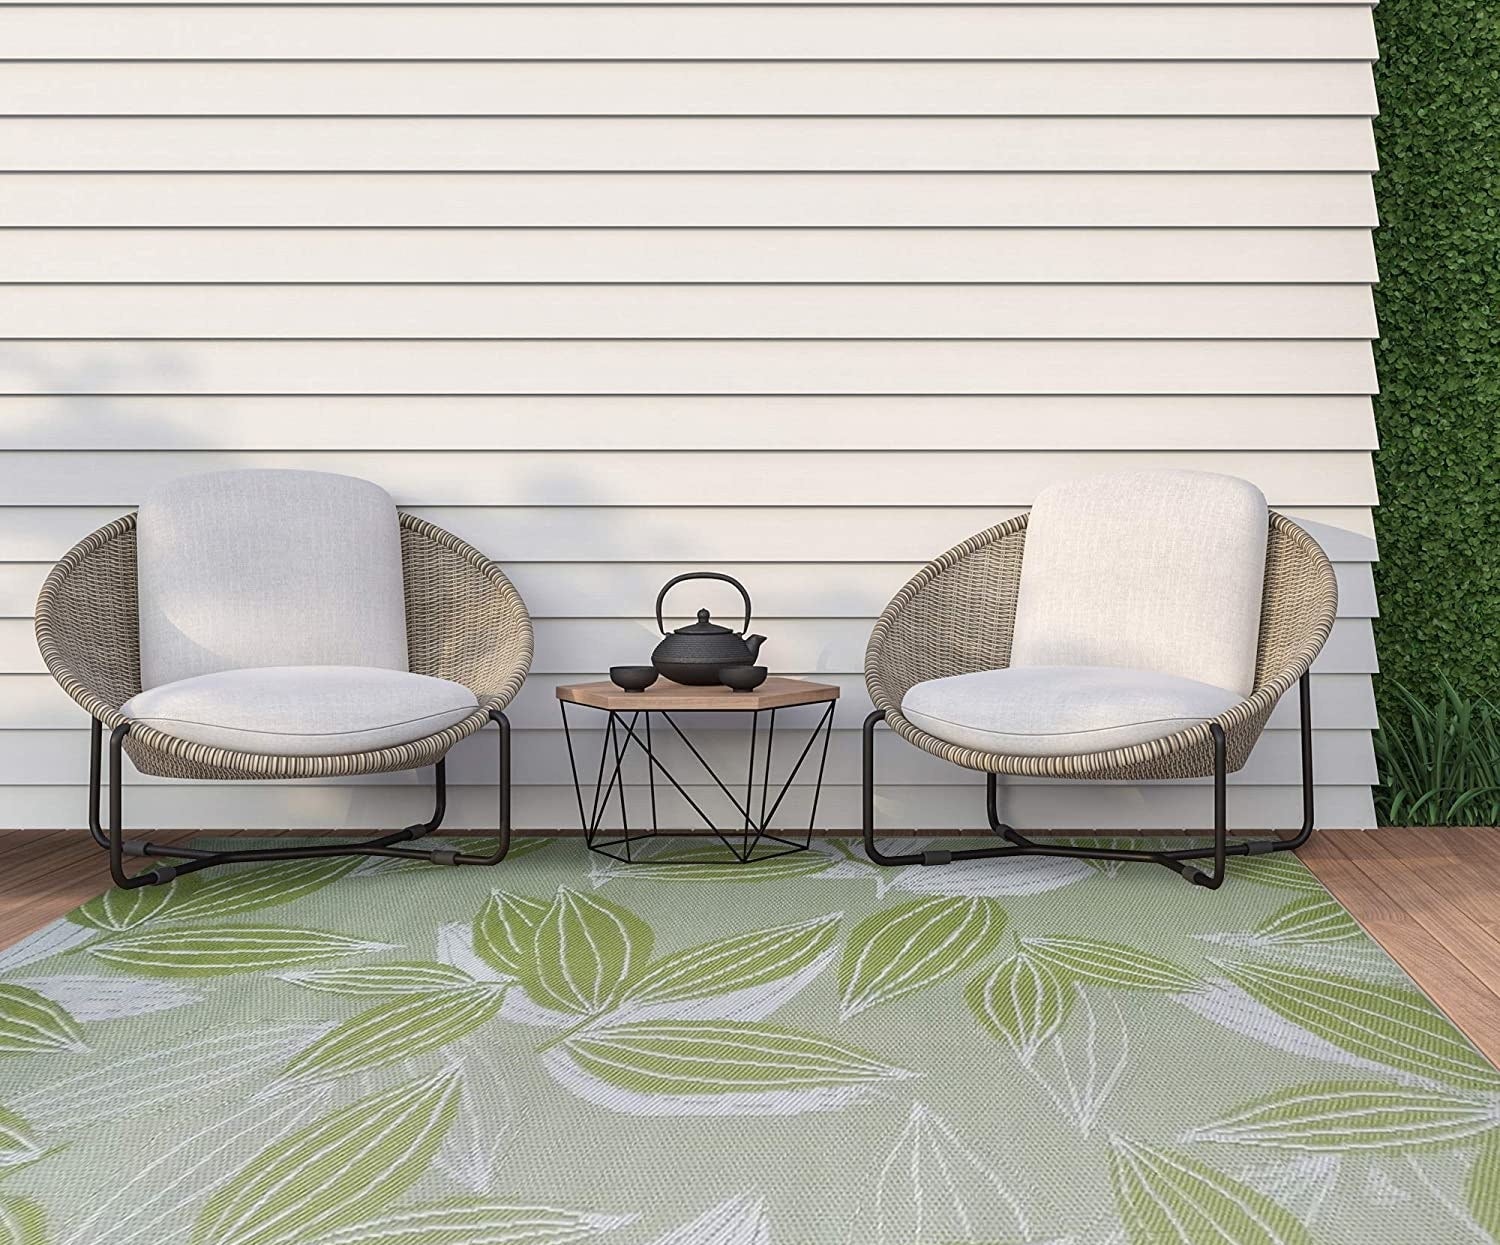 a patterned outdoor rug on a deck with two lounge chairs